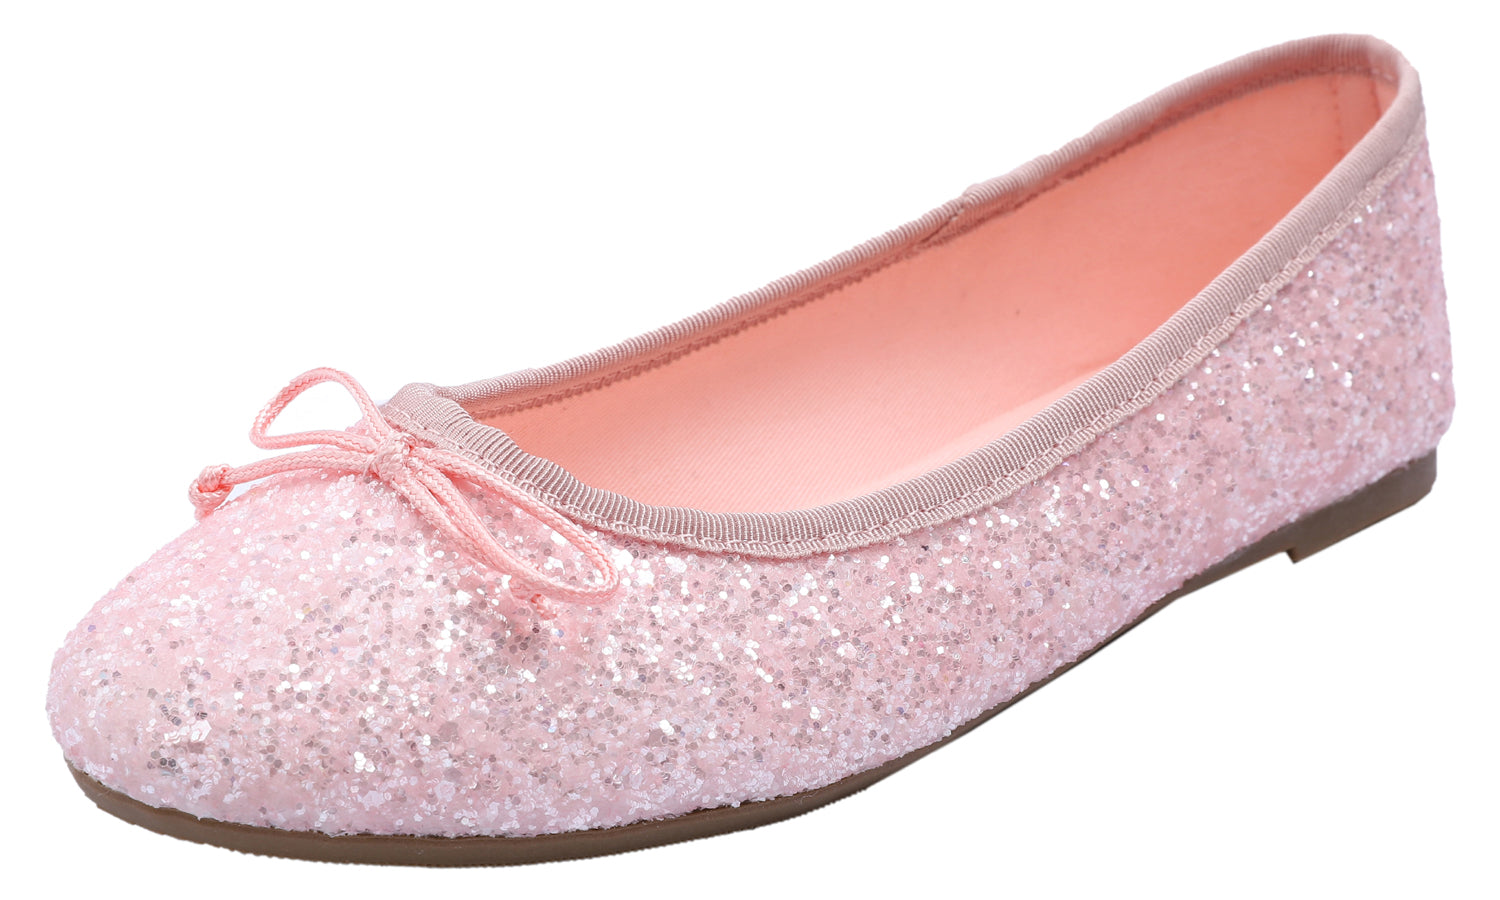 Feversole Women's Sparkle Memory Foam Cushioned Colorful Shiny Ballet Flats Glitter Baby Pink